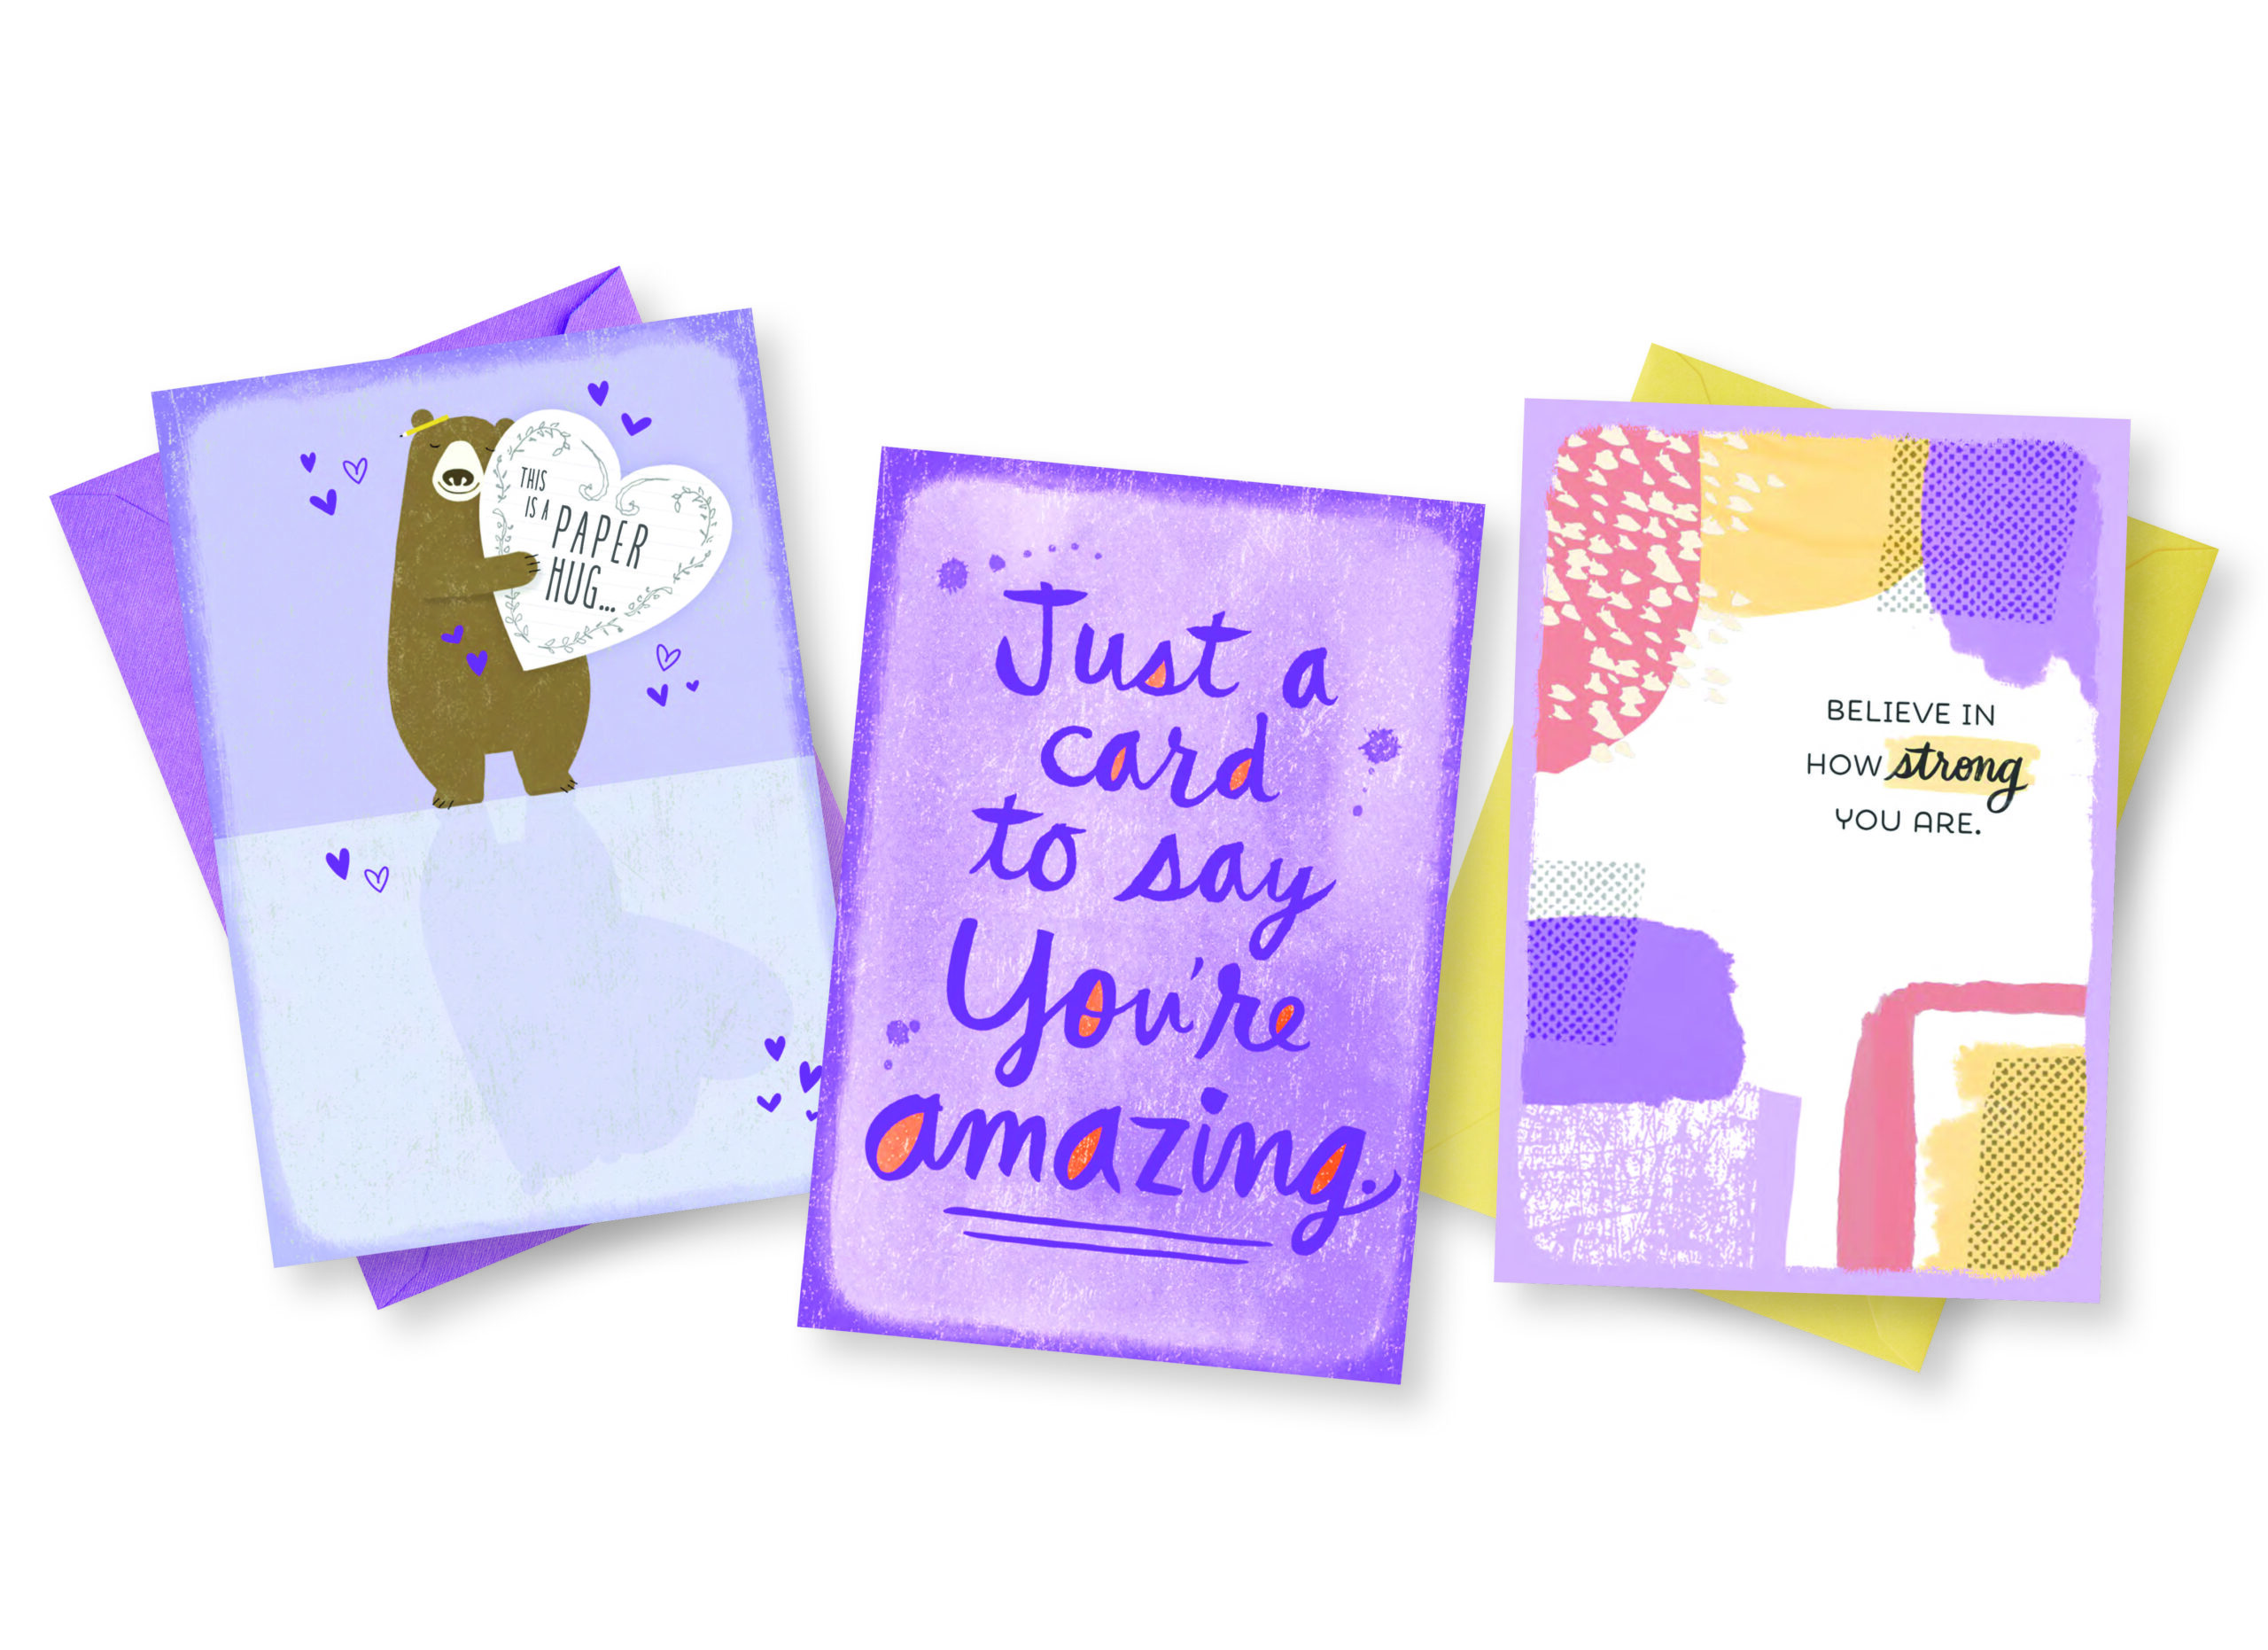 Hallmark Real Stories Card Giveaway